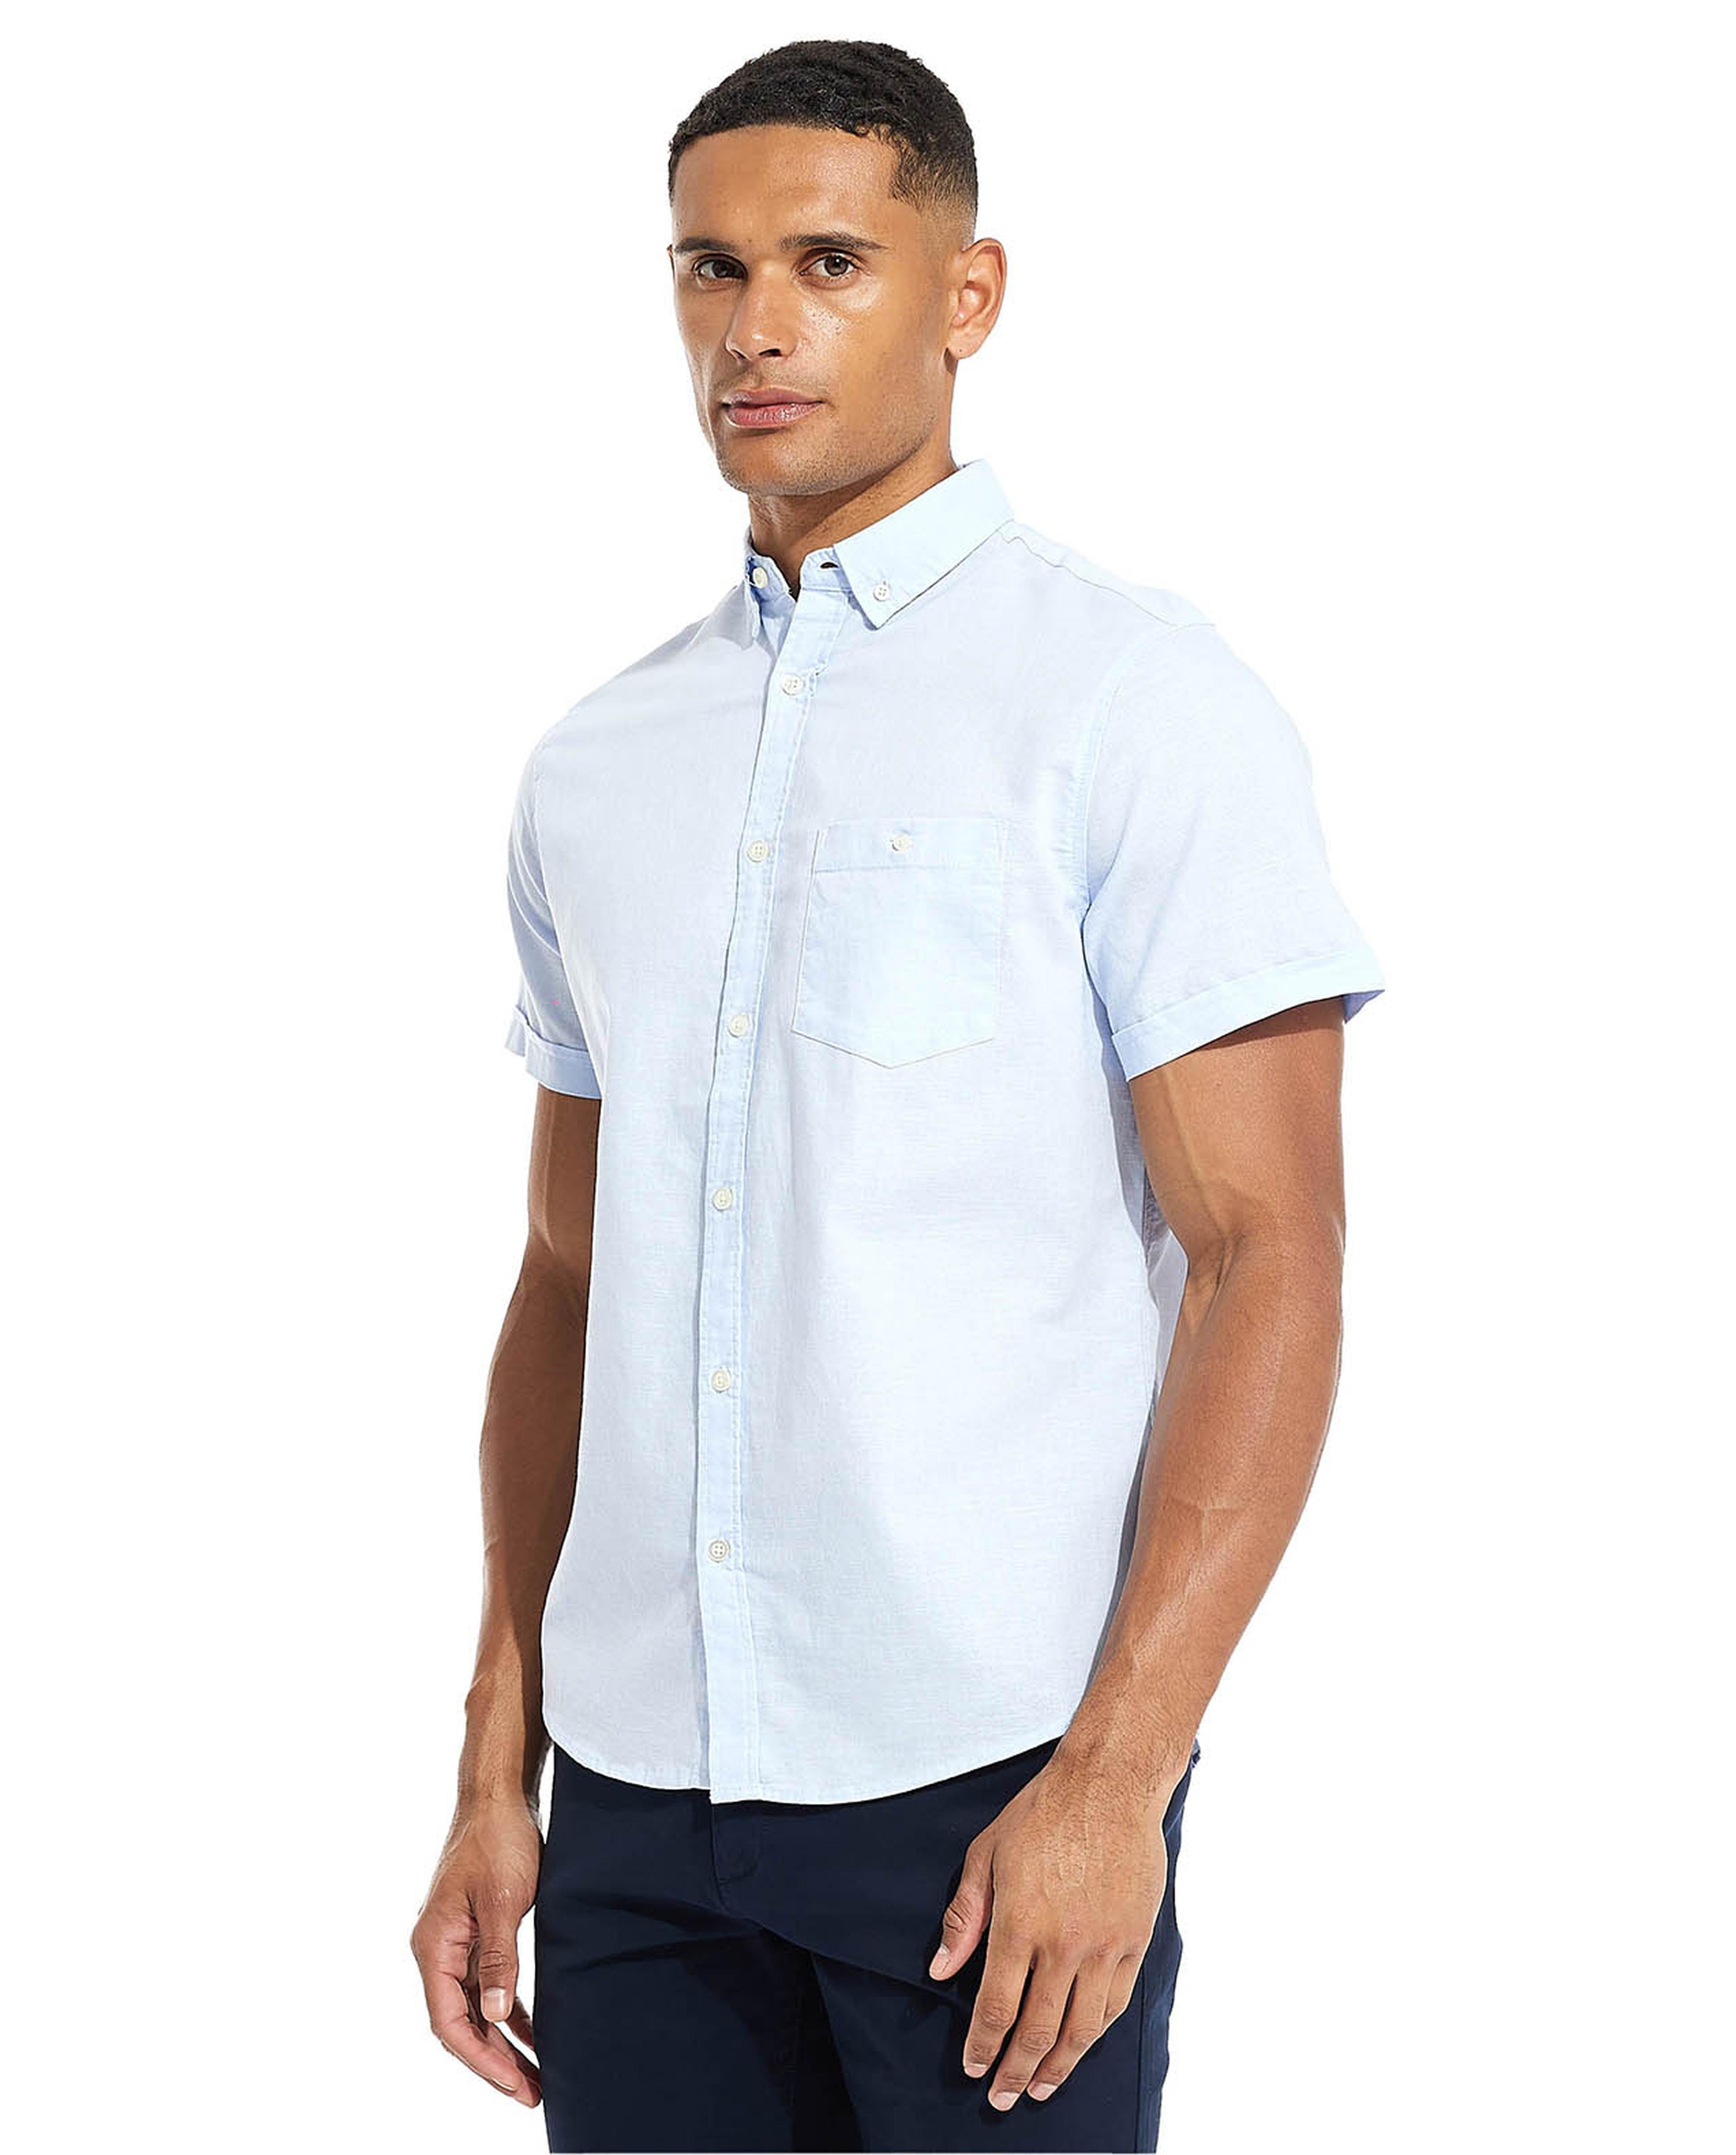 Solid Shirt with Button Down Collar and Short Sleeves